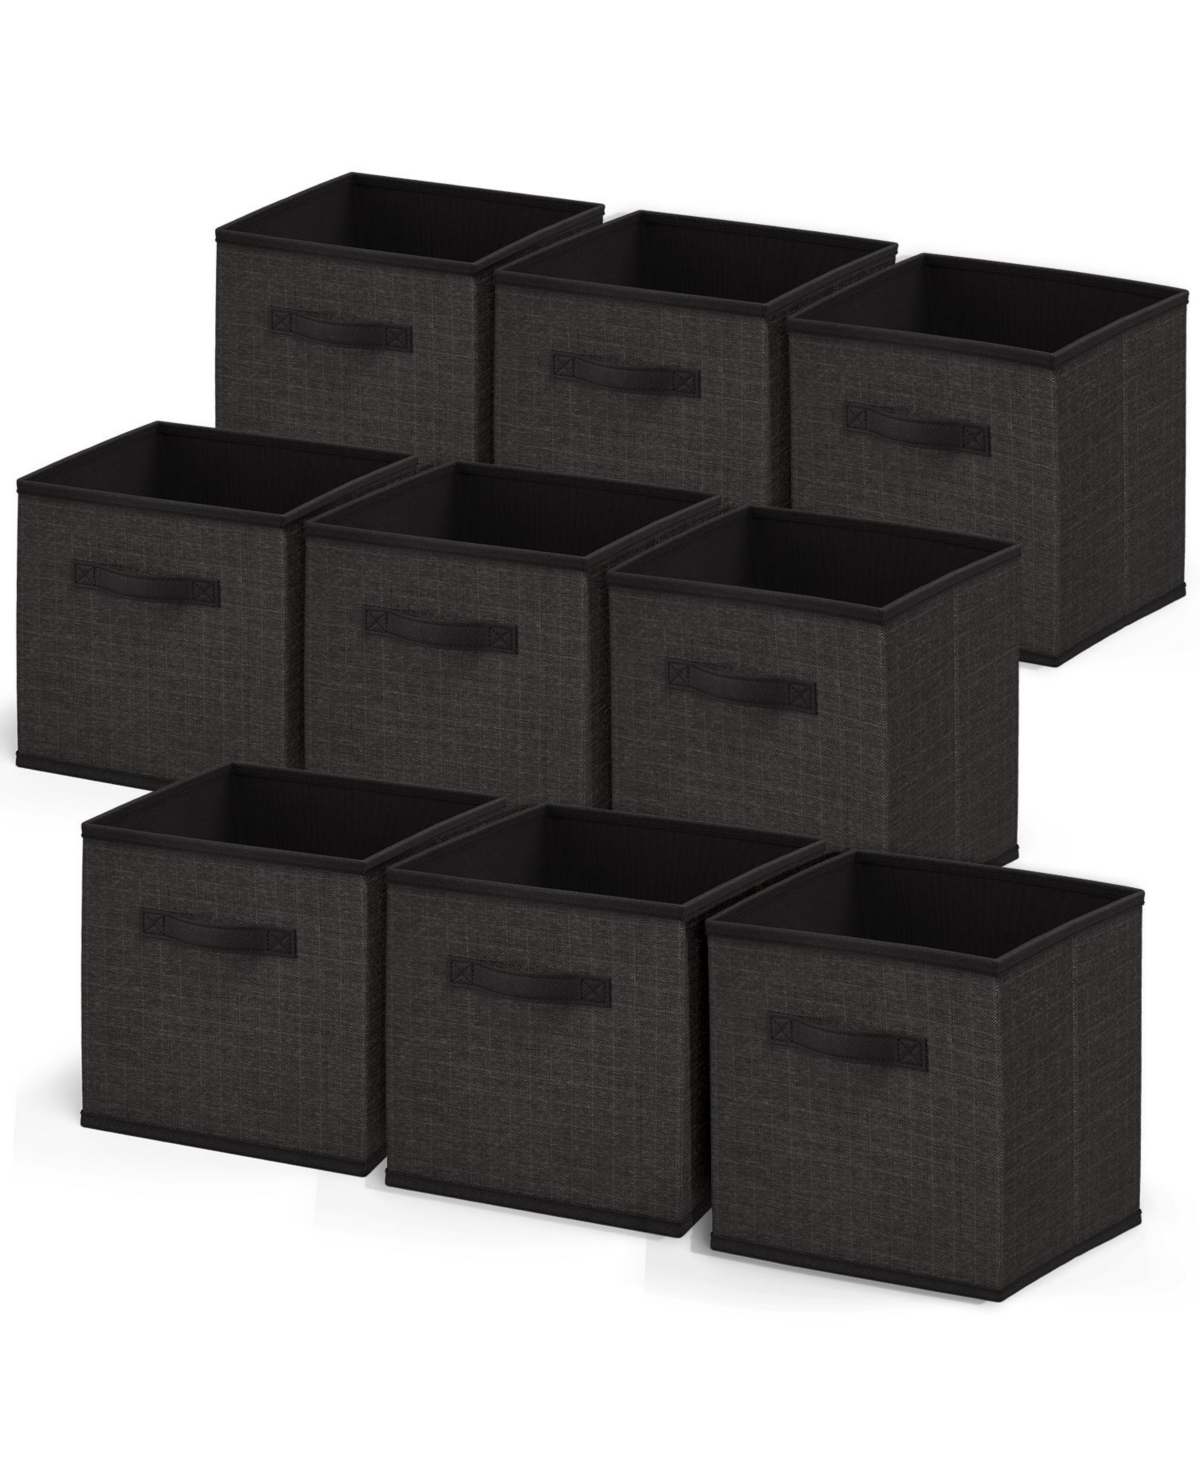 Foldable Fabric Cube Storage Bins with Handles - 9 Pack - Black